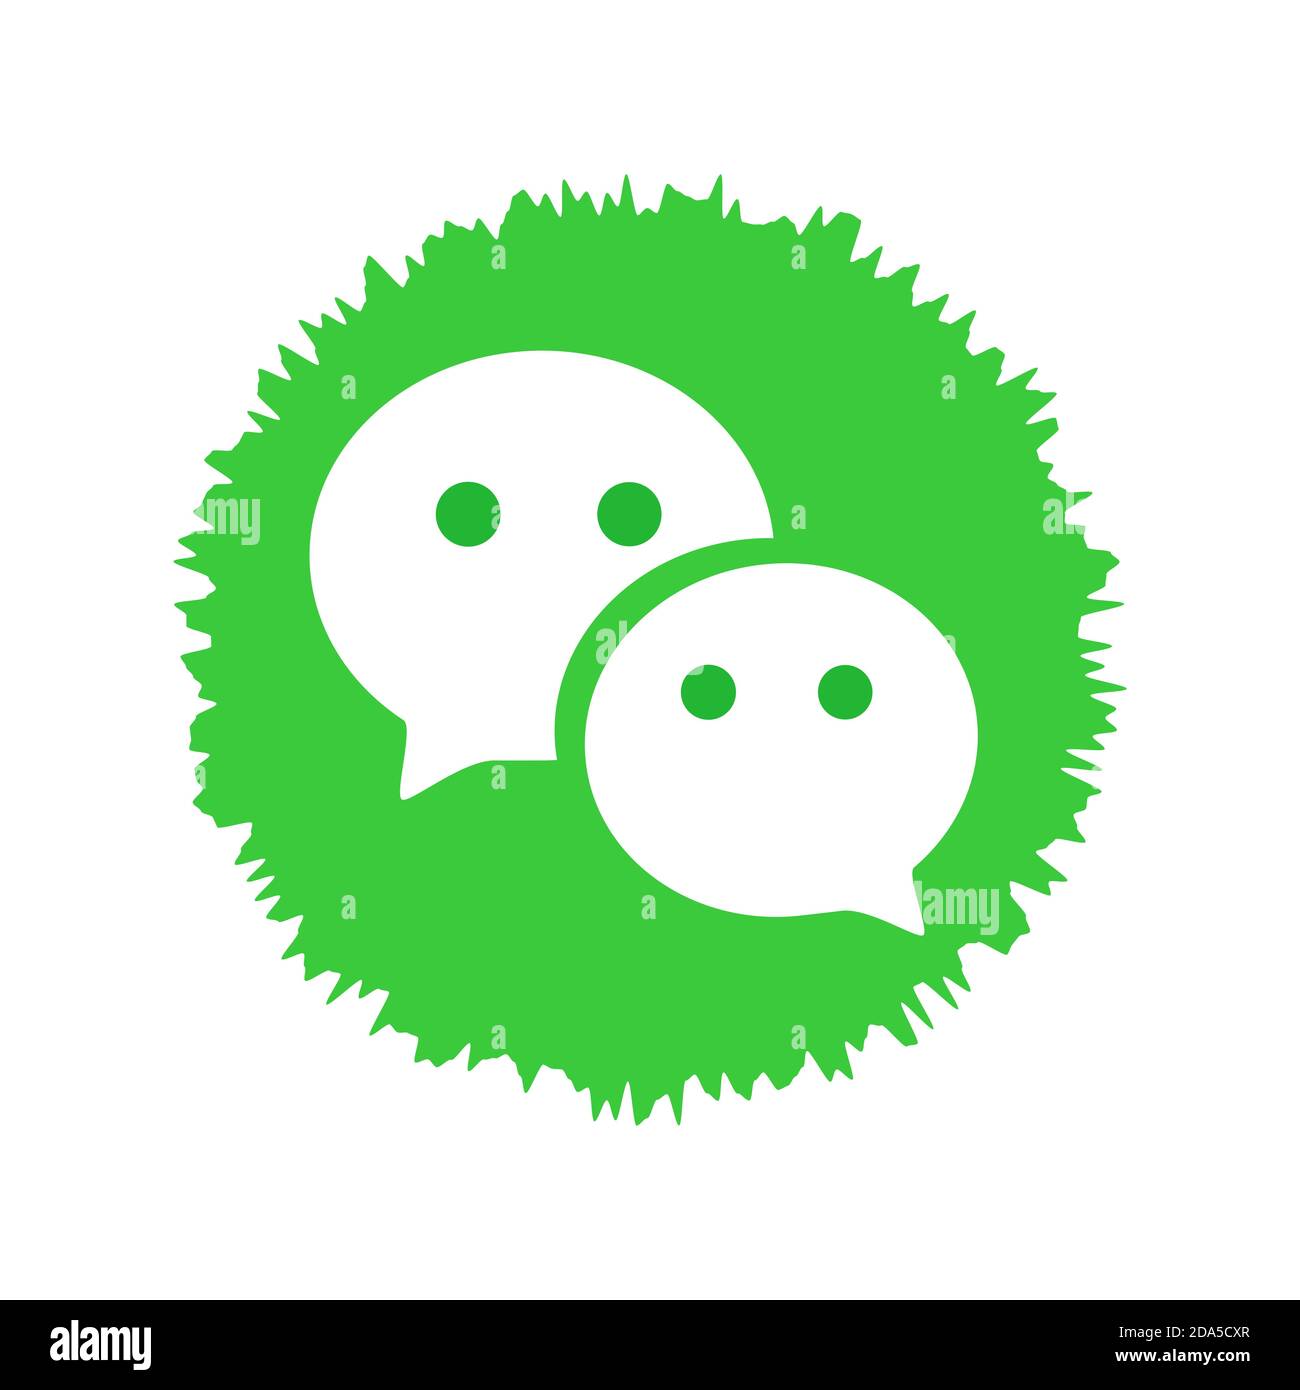 WeChat logo. WeChat is a Chinese multi-purpose messaging, social media and mobile payment app . Kharkiv, Ukraine - October, 2020 Stock Photo